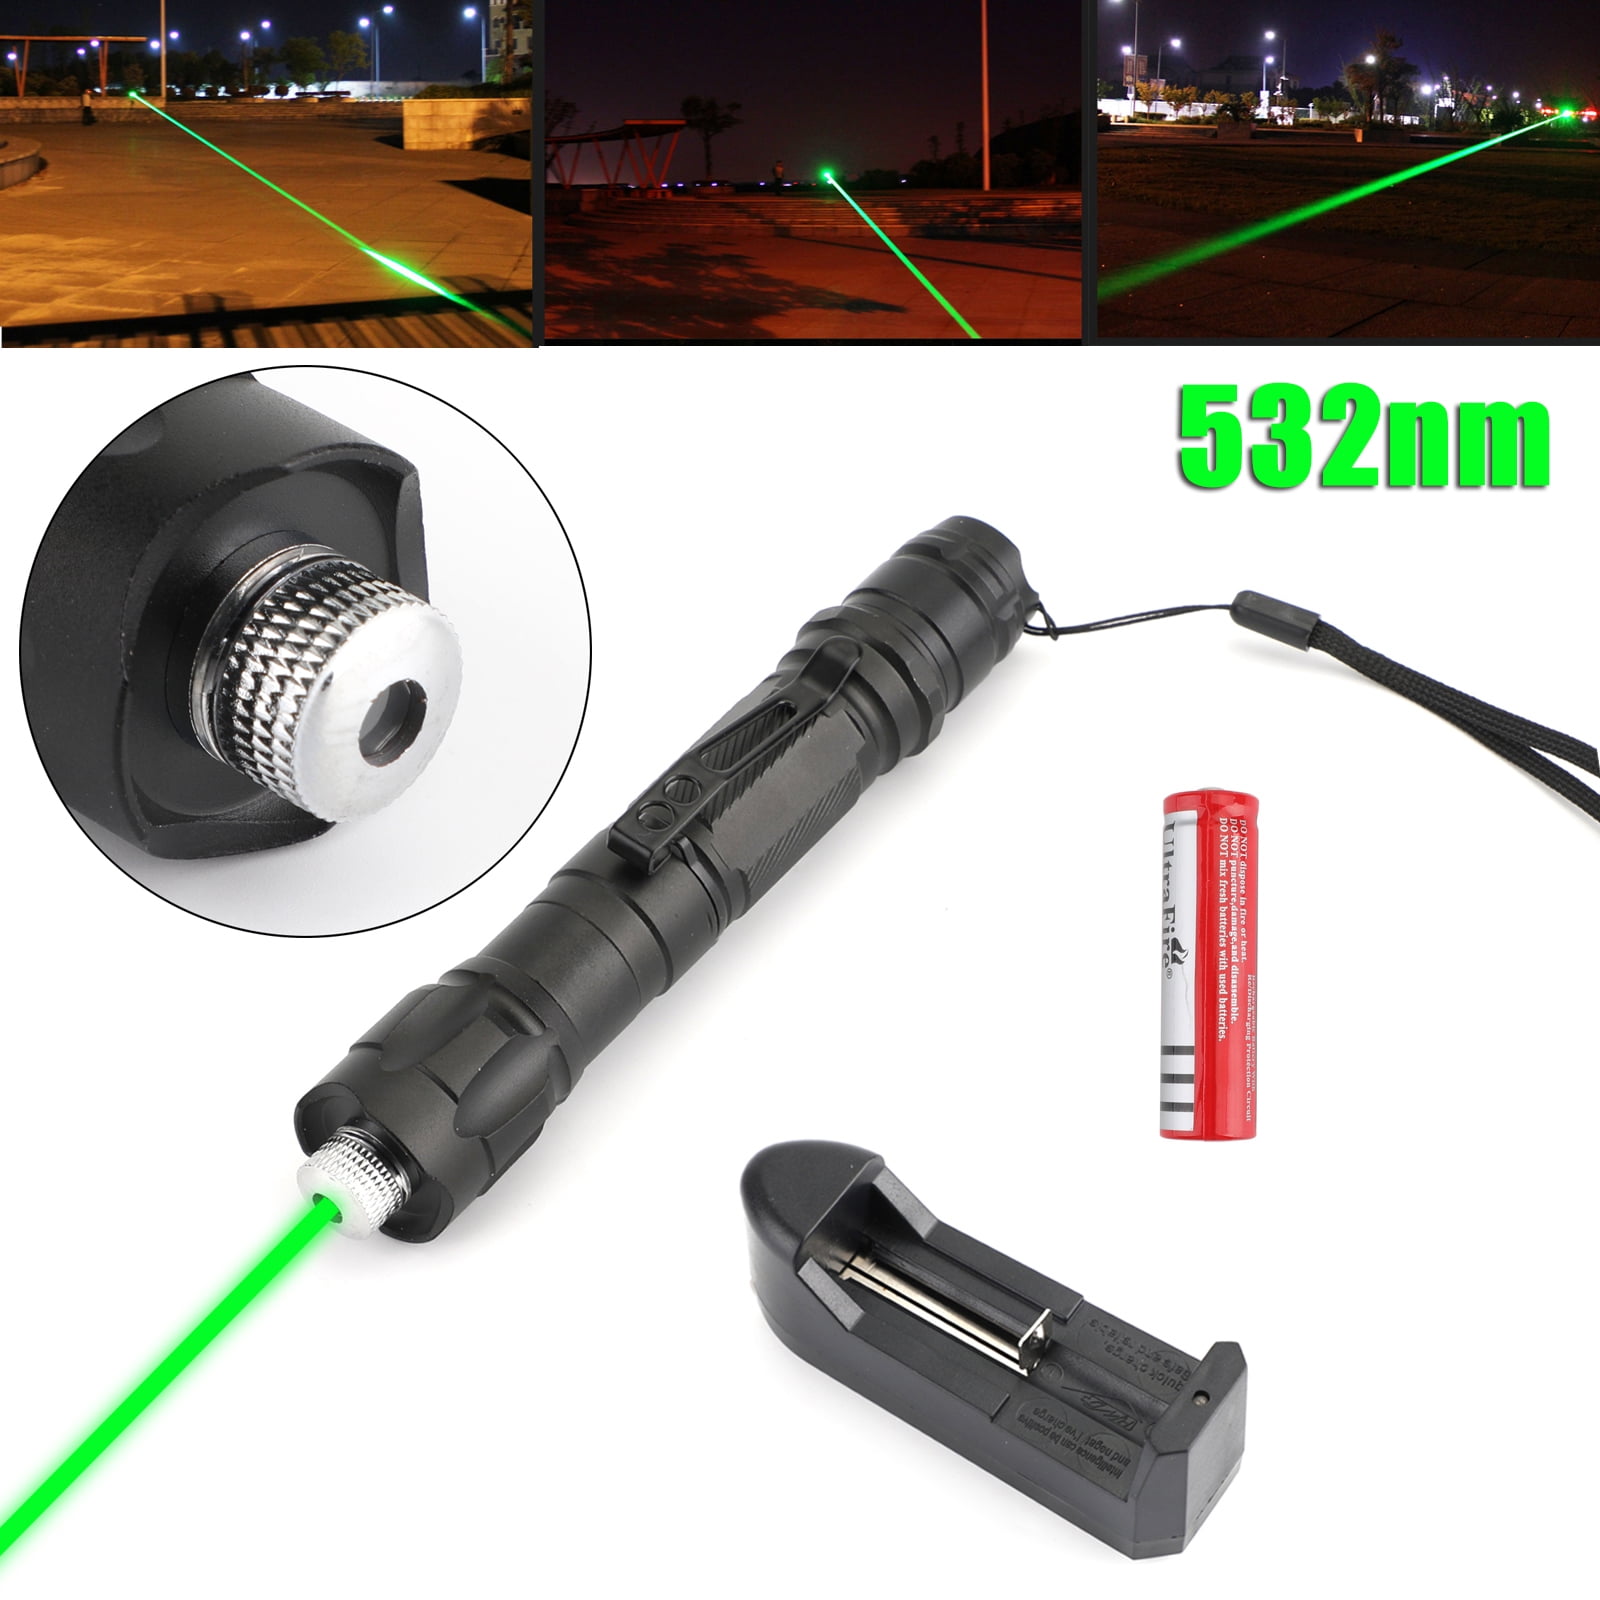 10x Powerful Mini Green Laser Pointer Pen 532nm Visible Beam Light Key Chain AAA 